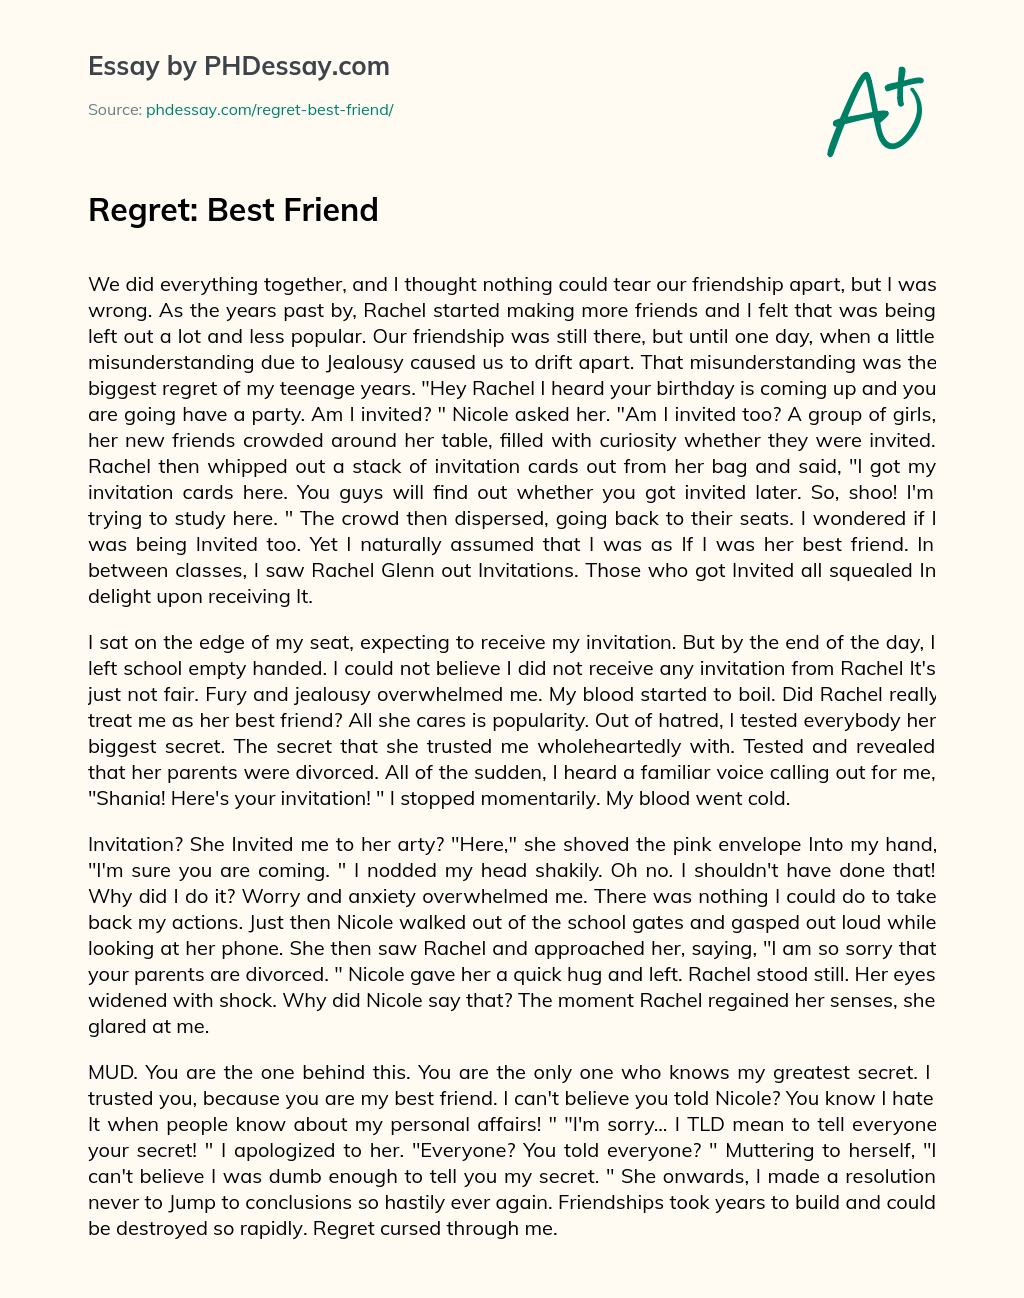 narrative essay about losing a best friend